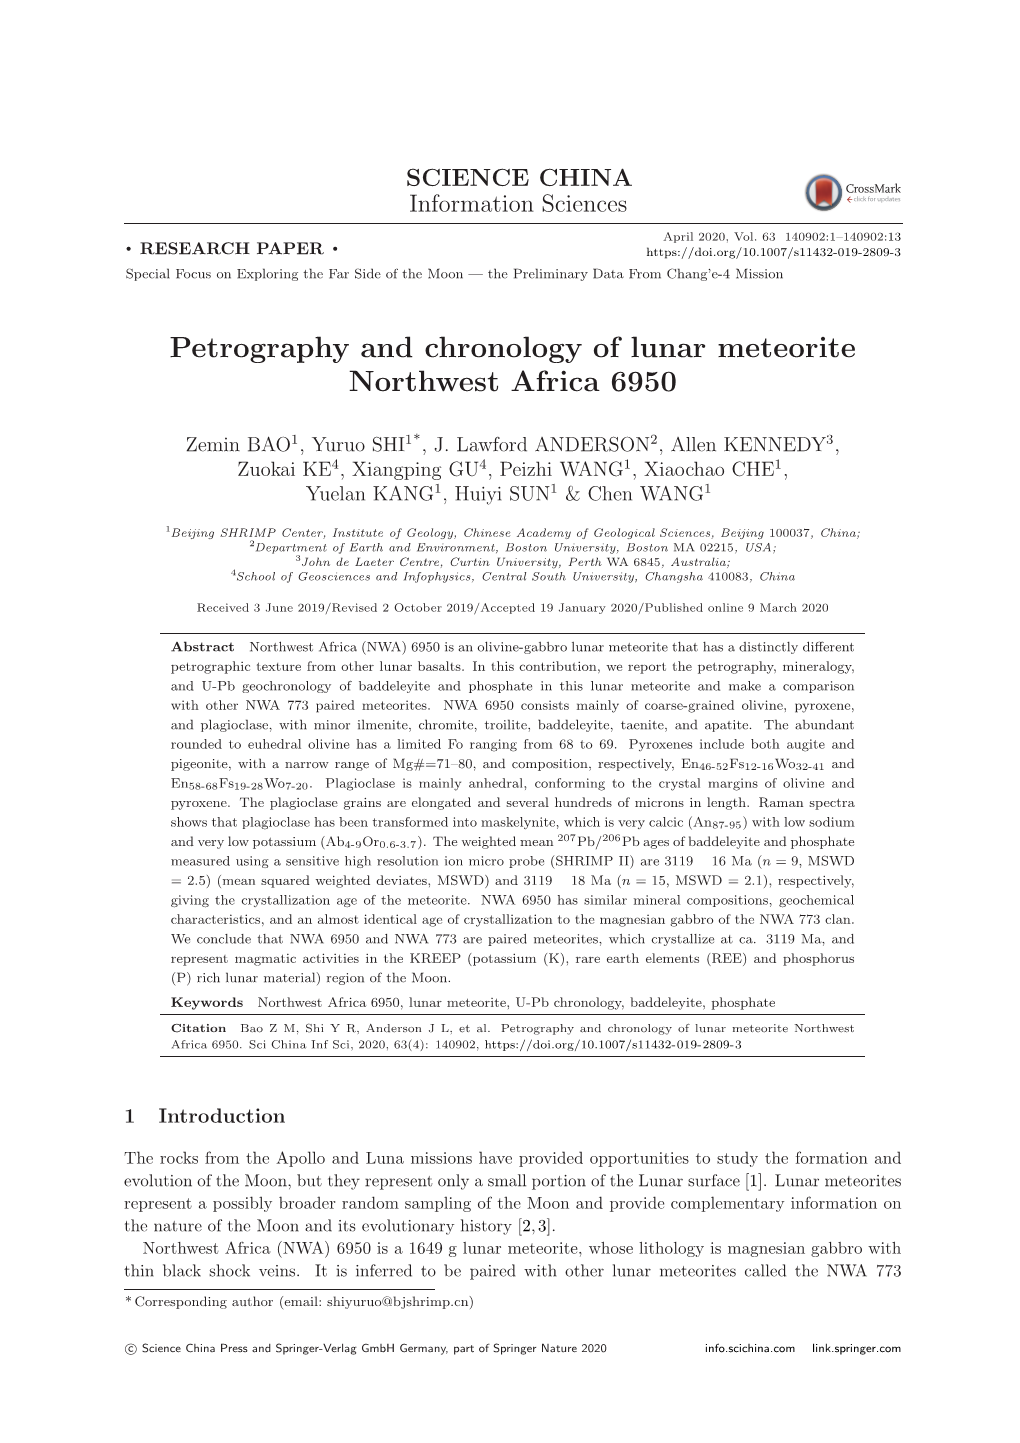 Petrography and Chronology of Lunar Meteorite Northwest Africa 6950